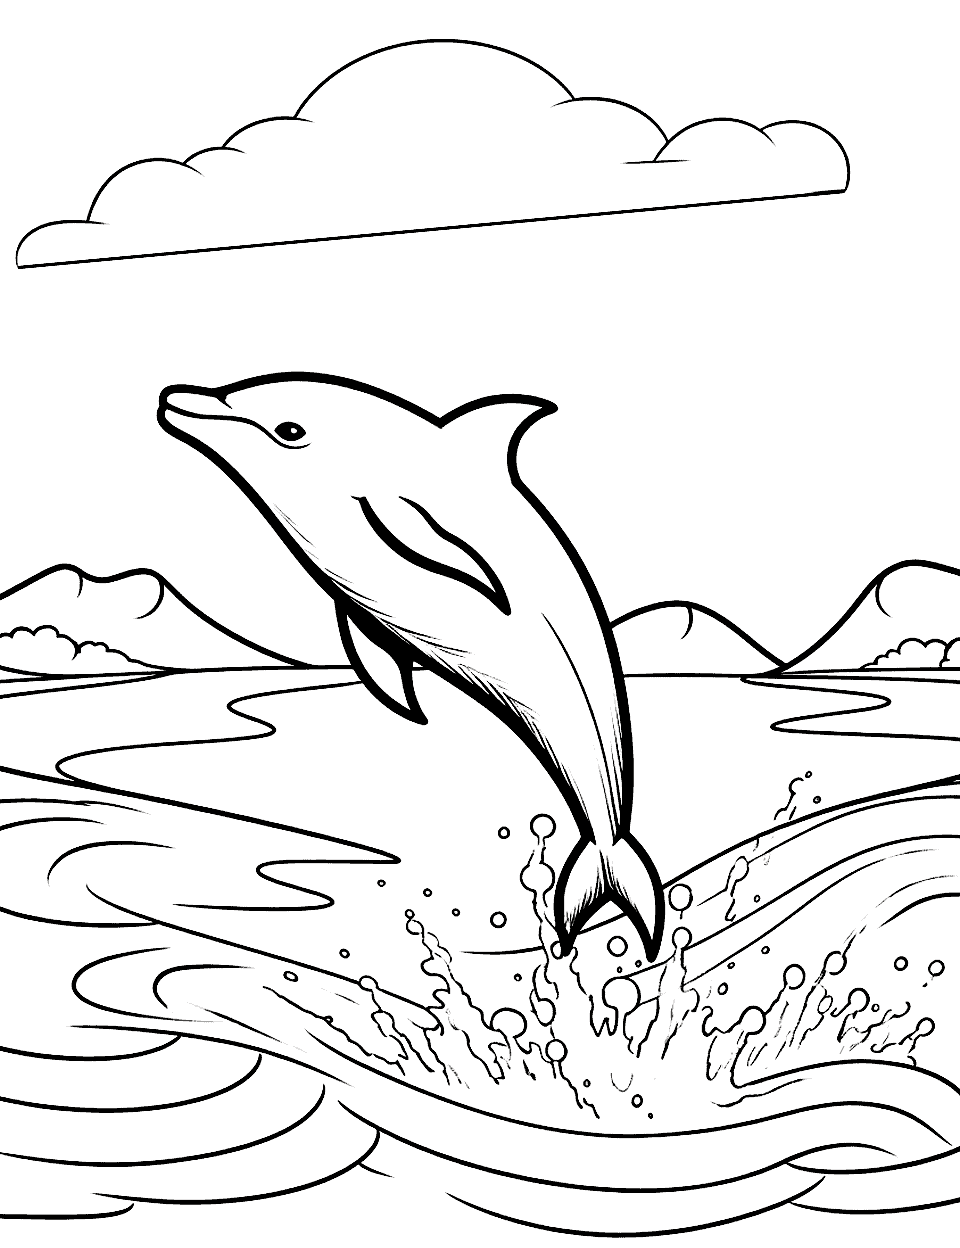 Dolphin Leaping Out of the Water Nature Coloring Page - A dolphin jumping out of the sea, with the horizon in the background.